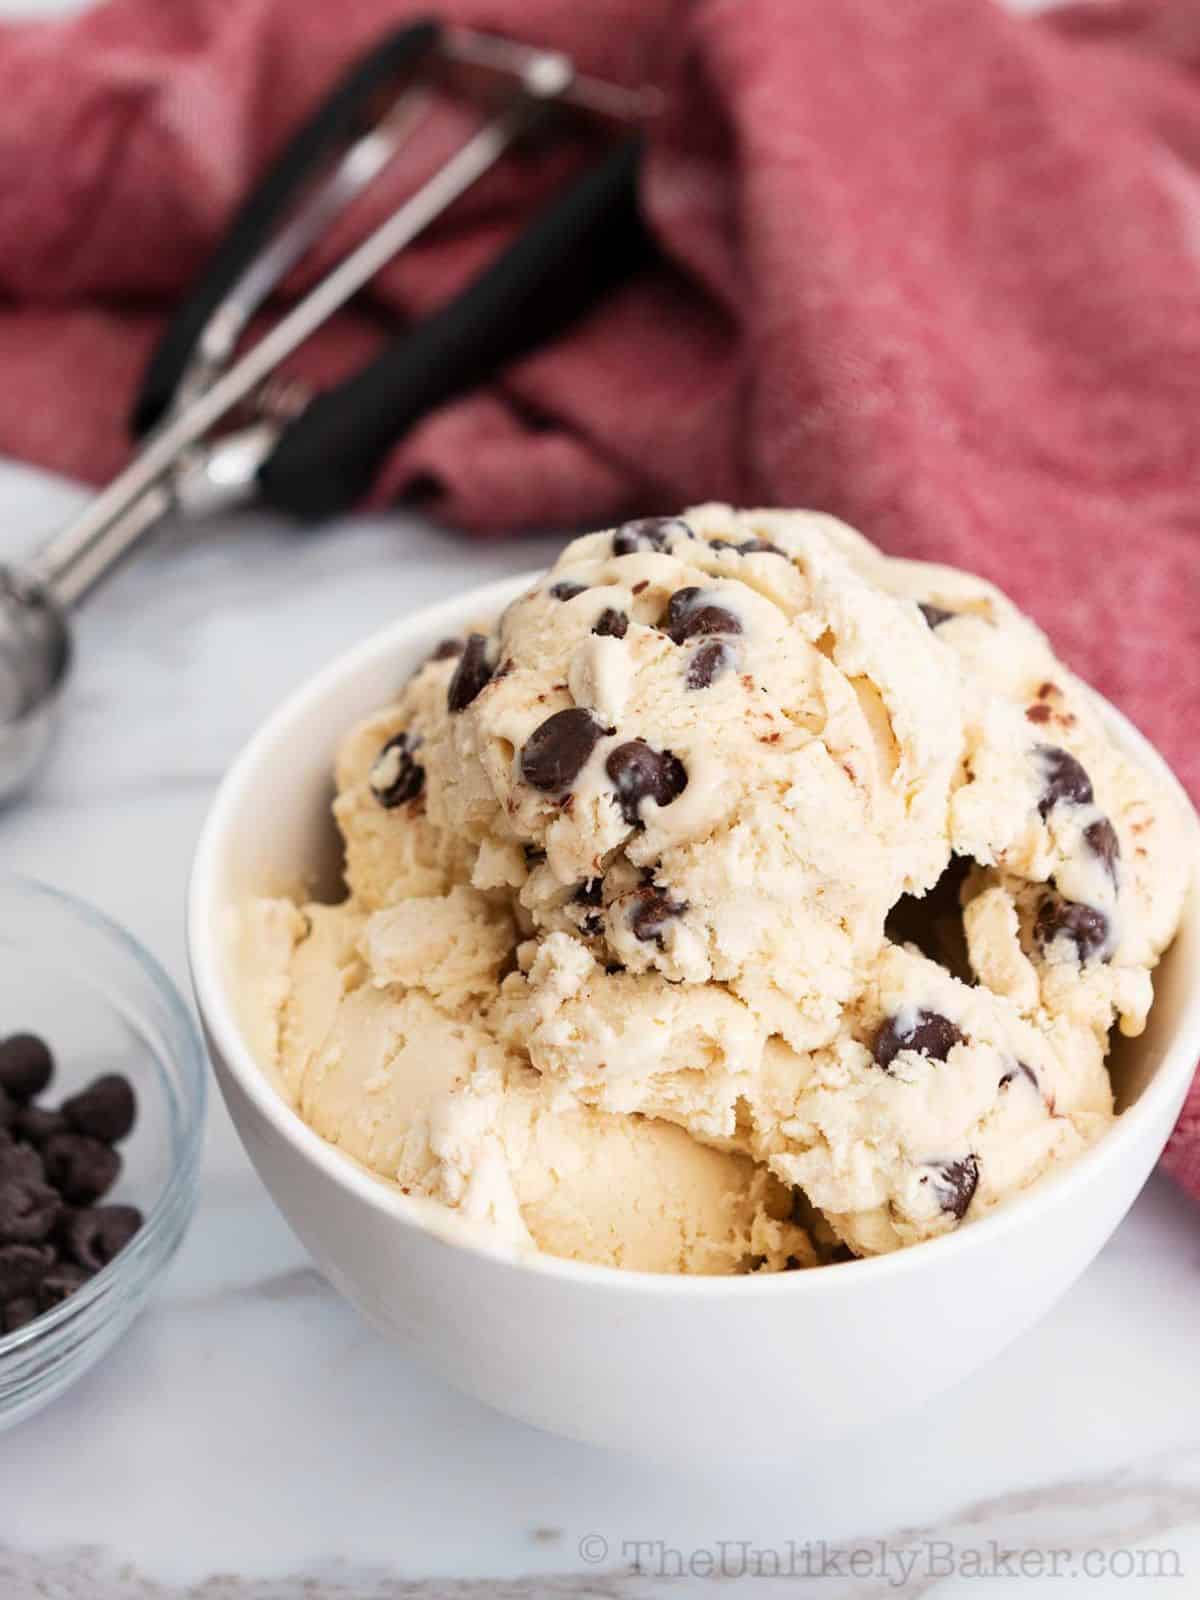 coffee chocolate chip ice cream featuring the balance of espresso, chocolate chips, and a creamy vanilla base.